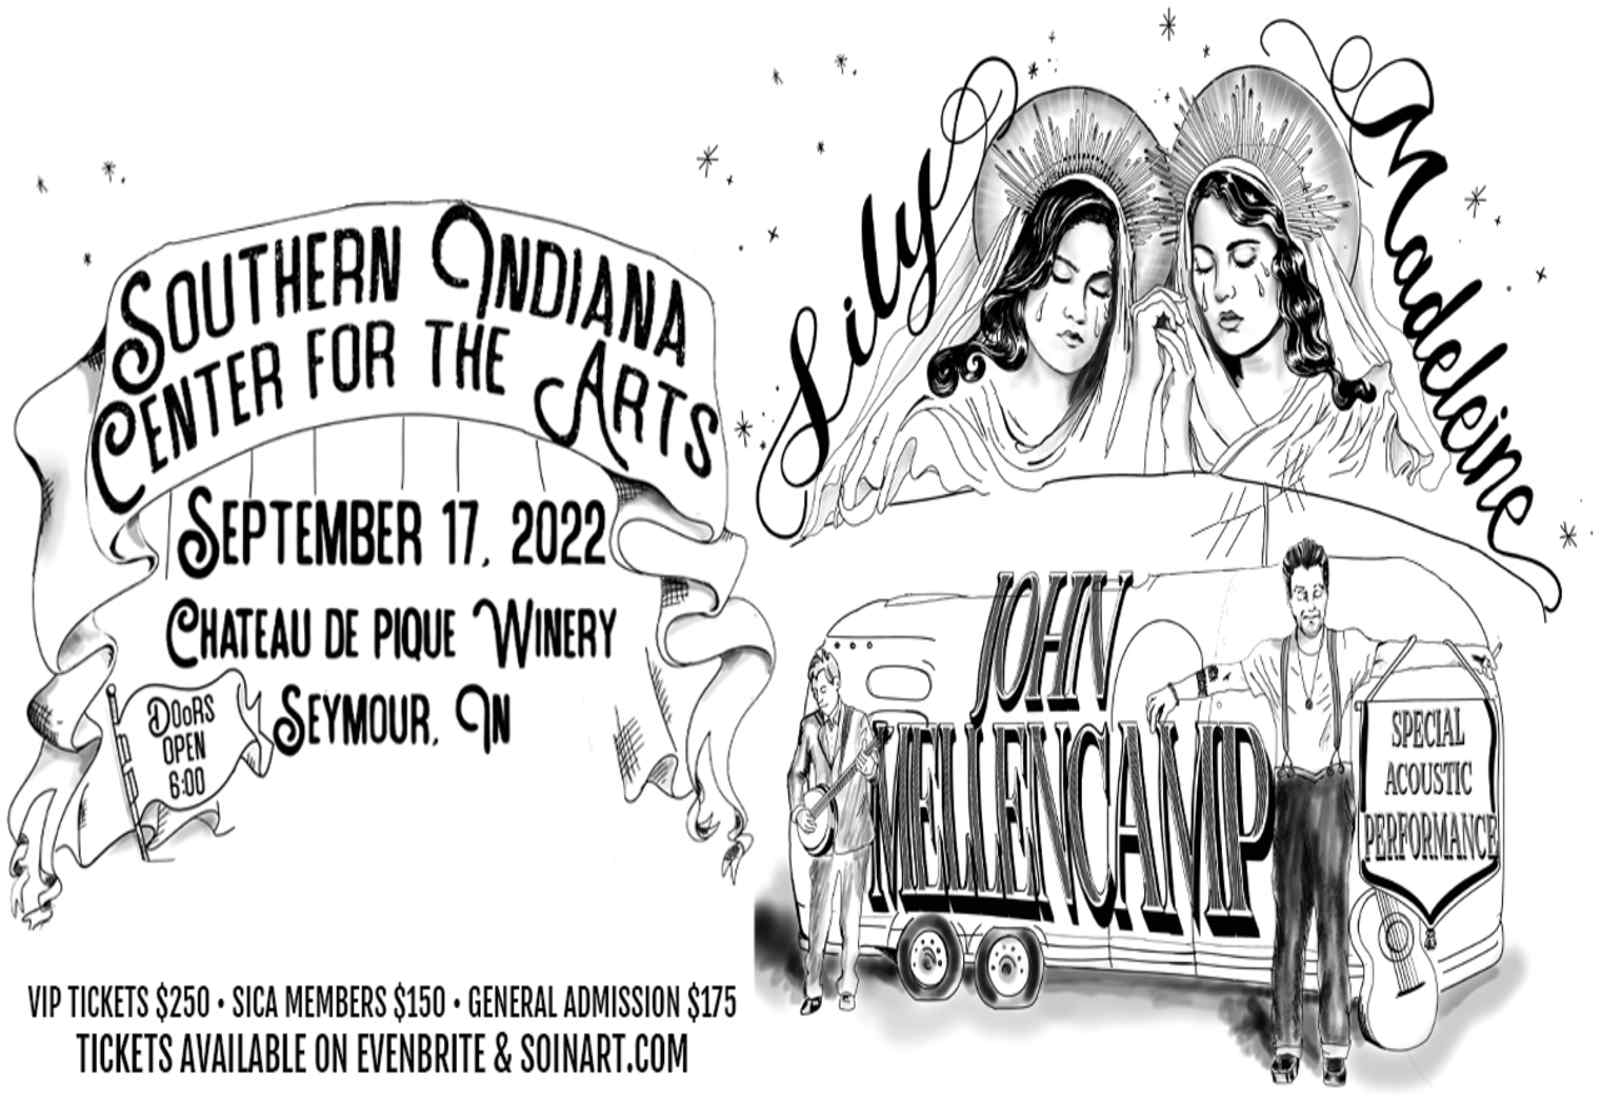 Southern Indiana Center for the Arts Announces Artful Affair